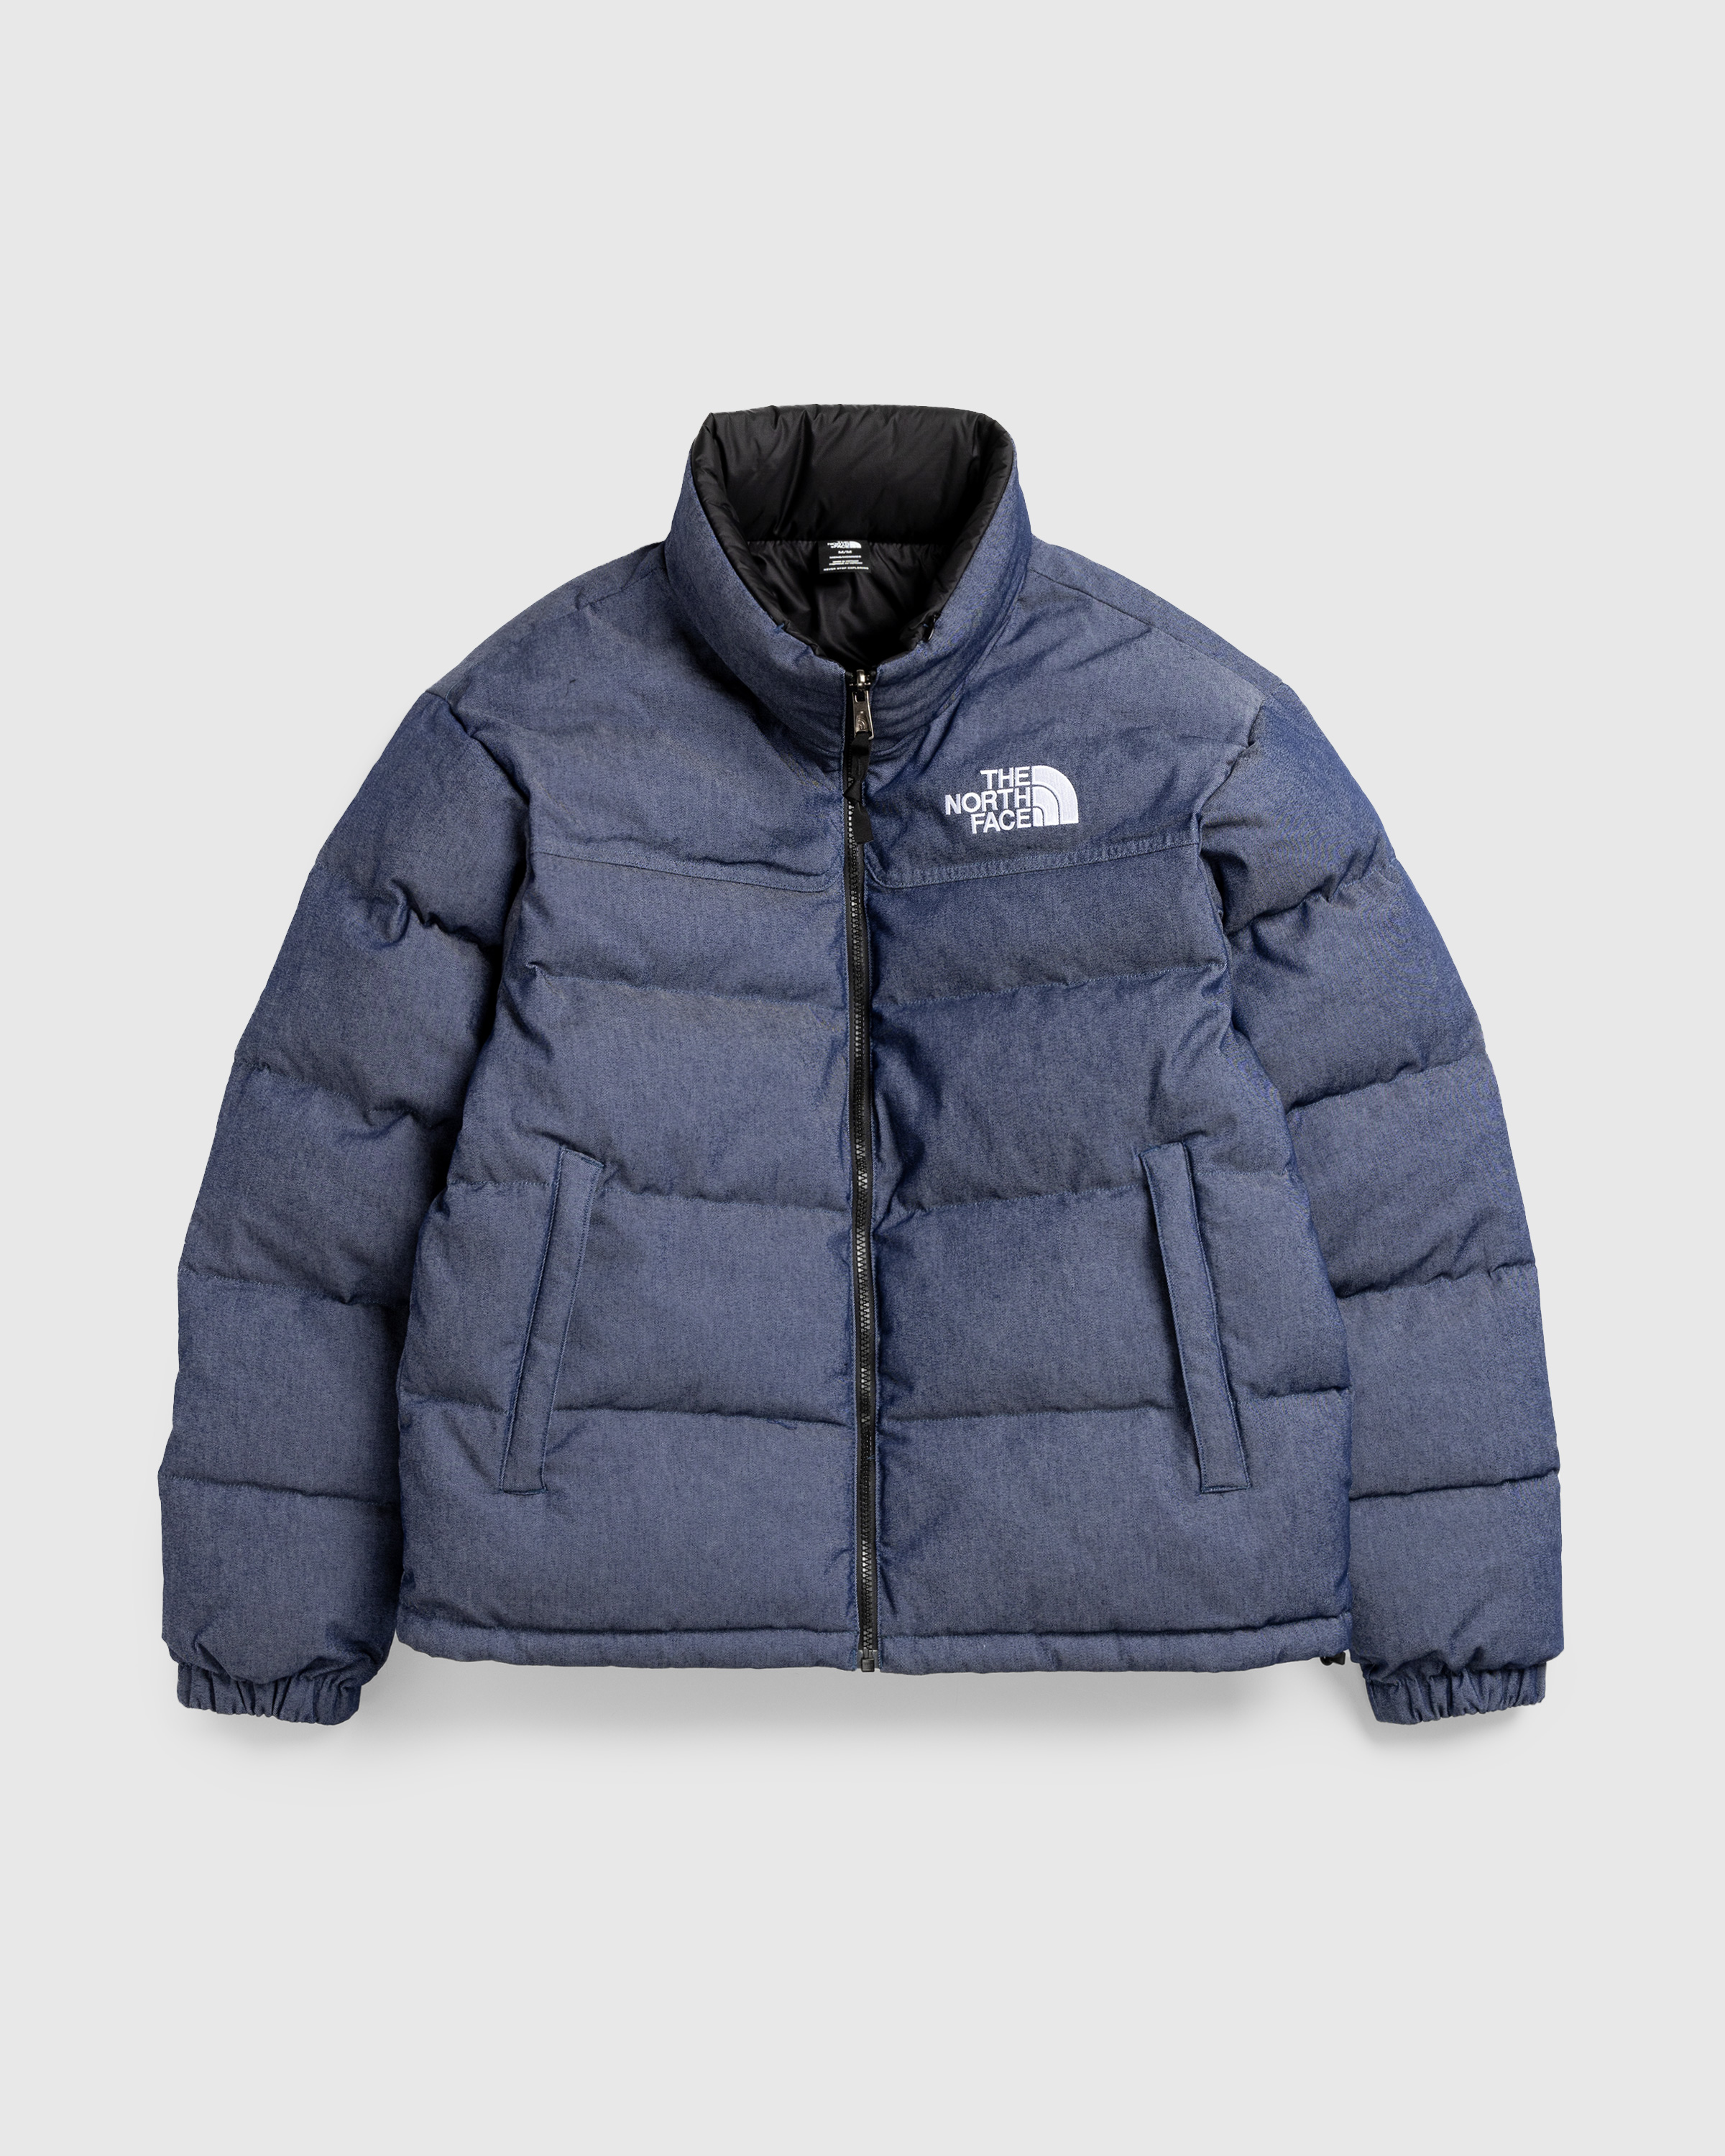 The North Face – ’92 Reversible Nuptse Jacket Sulphur Moss/Coal Brown-2 - Outerwear - Blue - Image 1